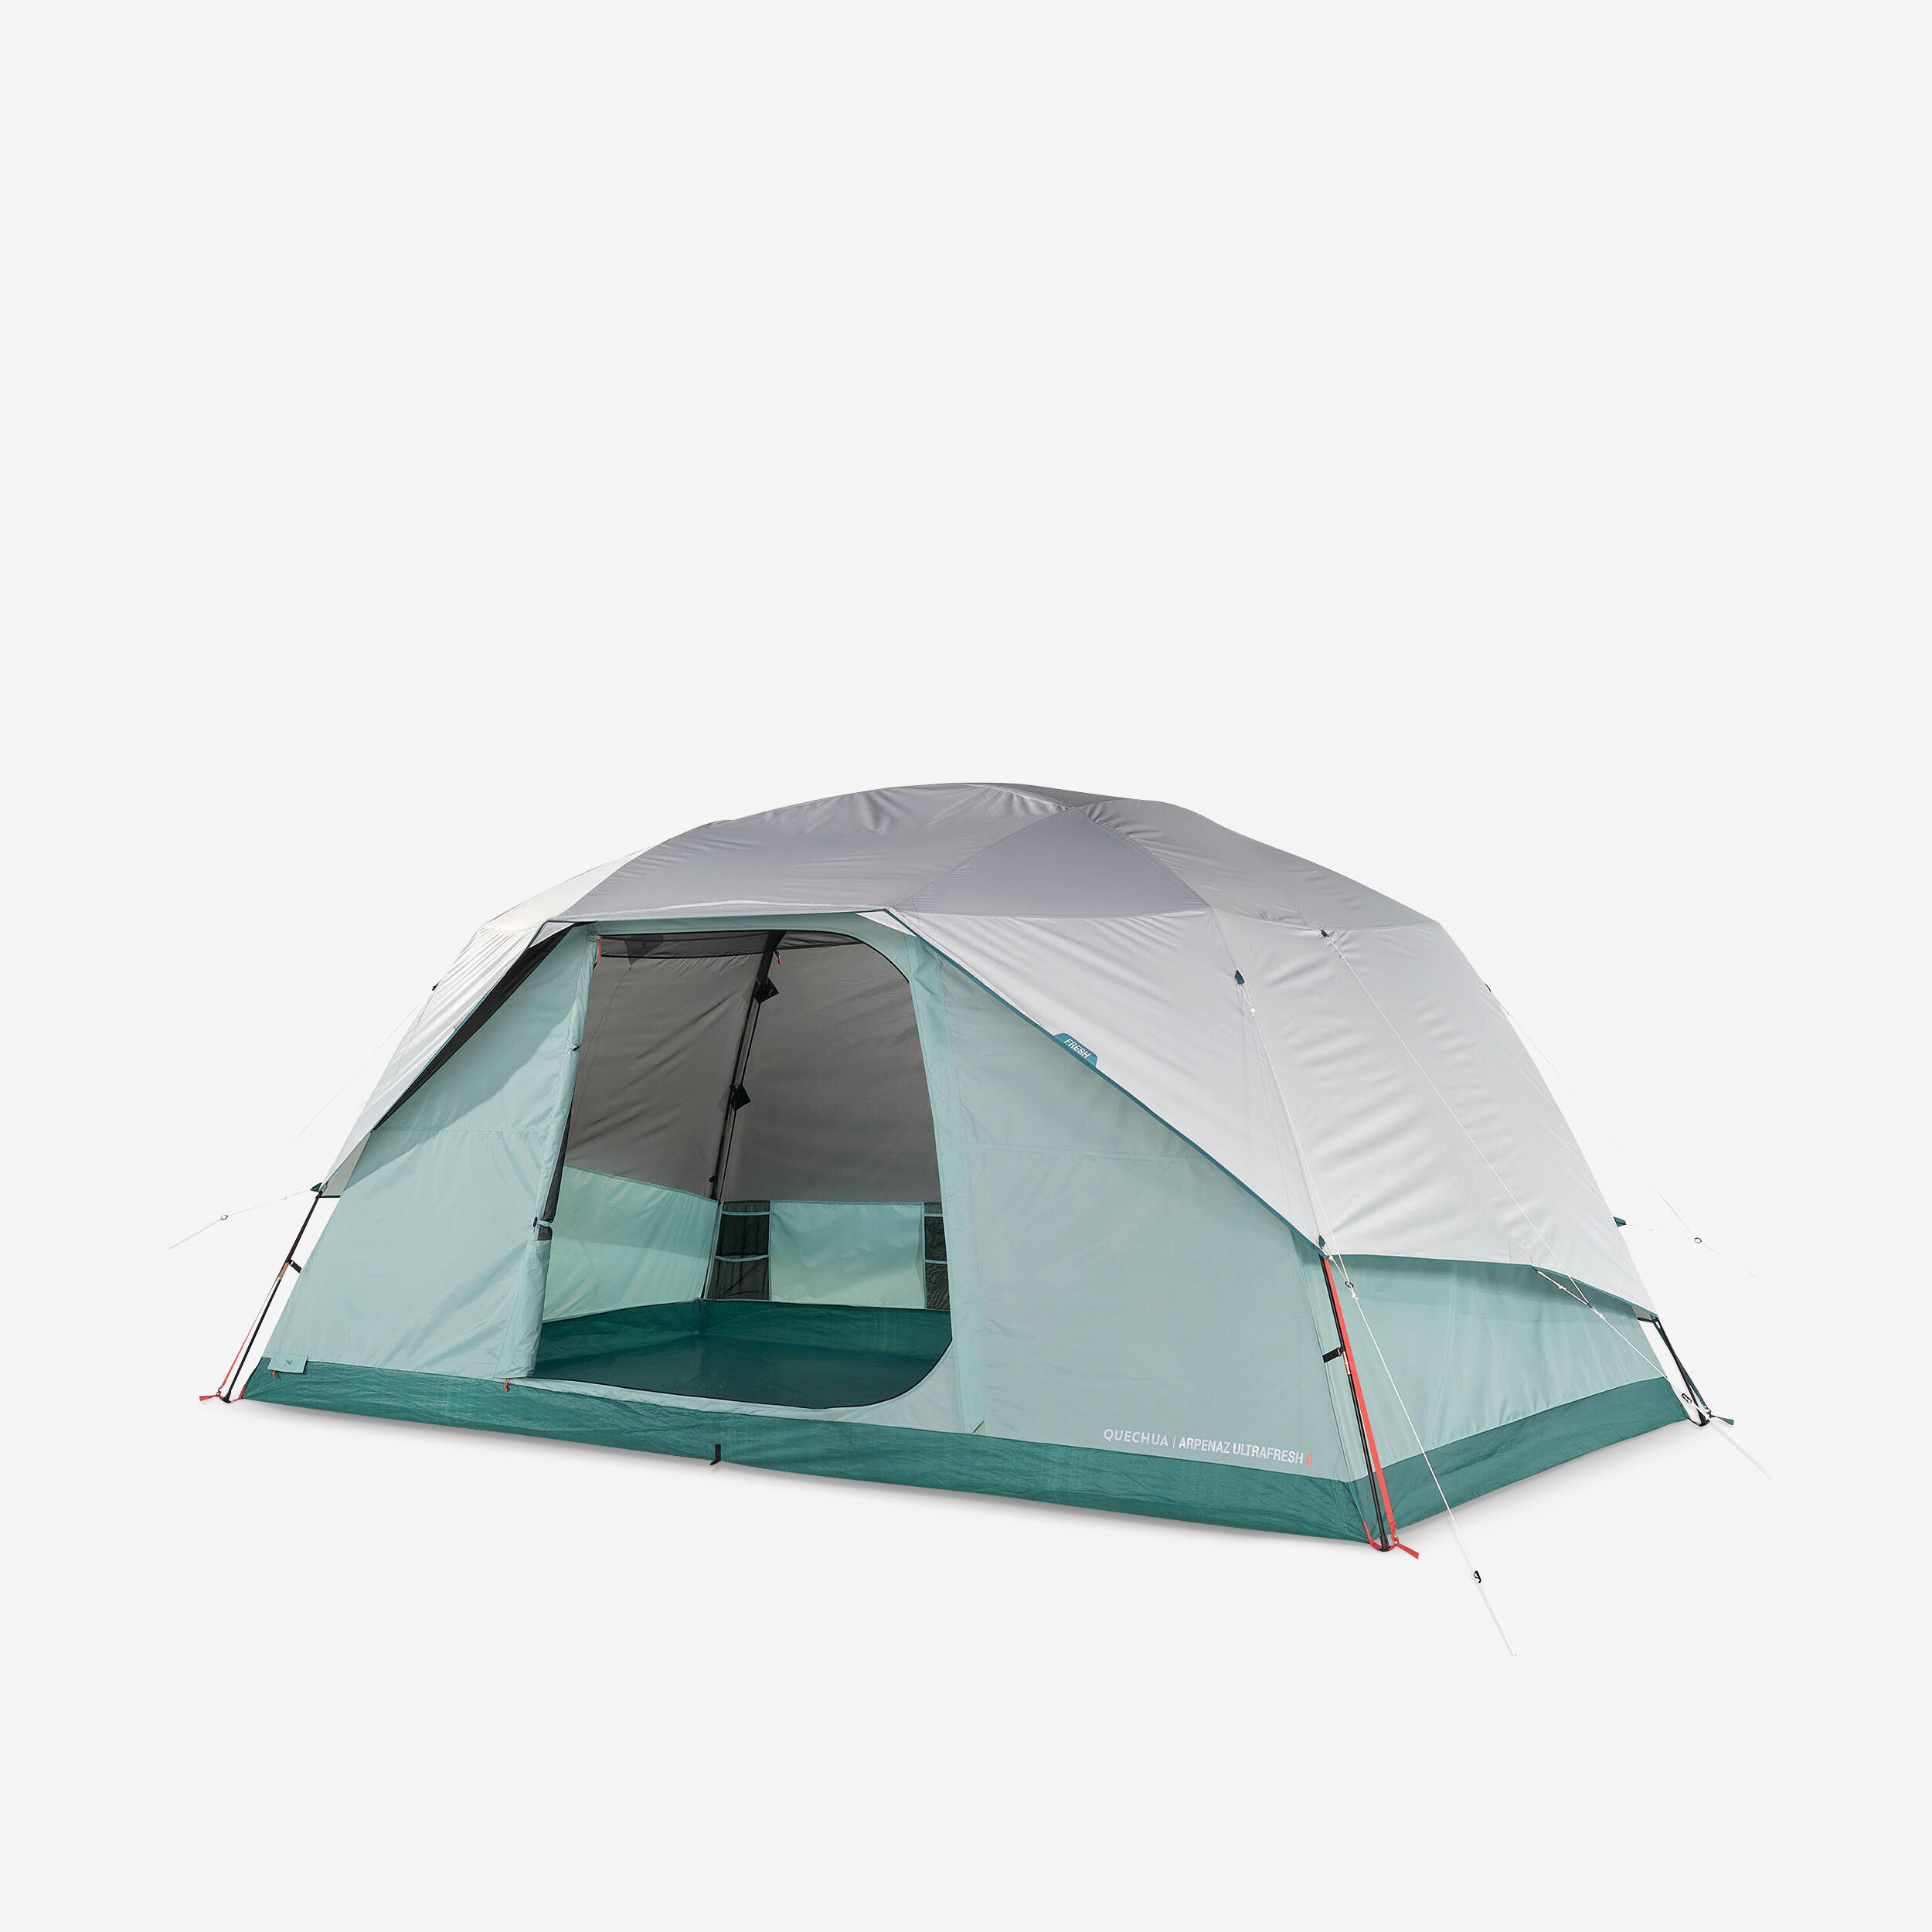 Camping tent with poles - Arpenaz 6 ULTRAFRESH - 6 Person 1/19